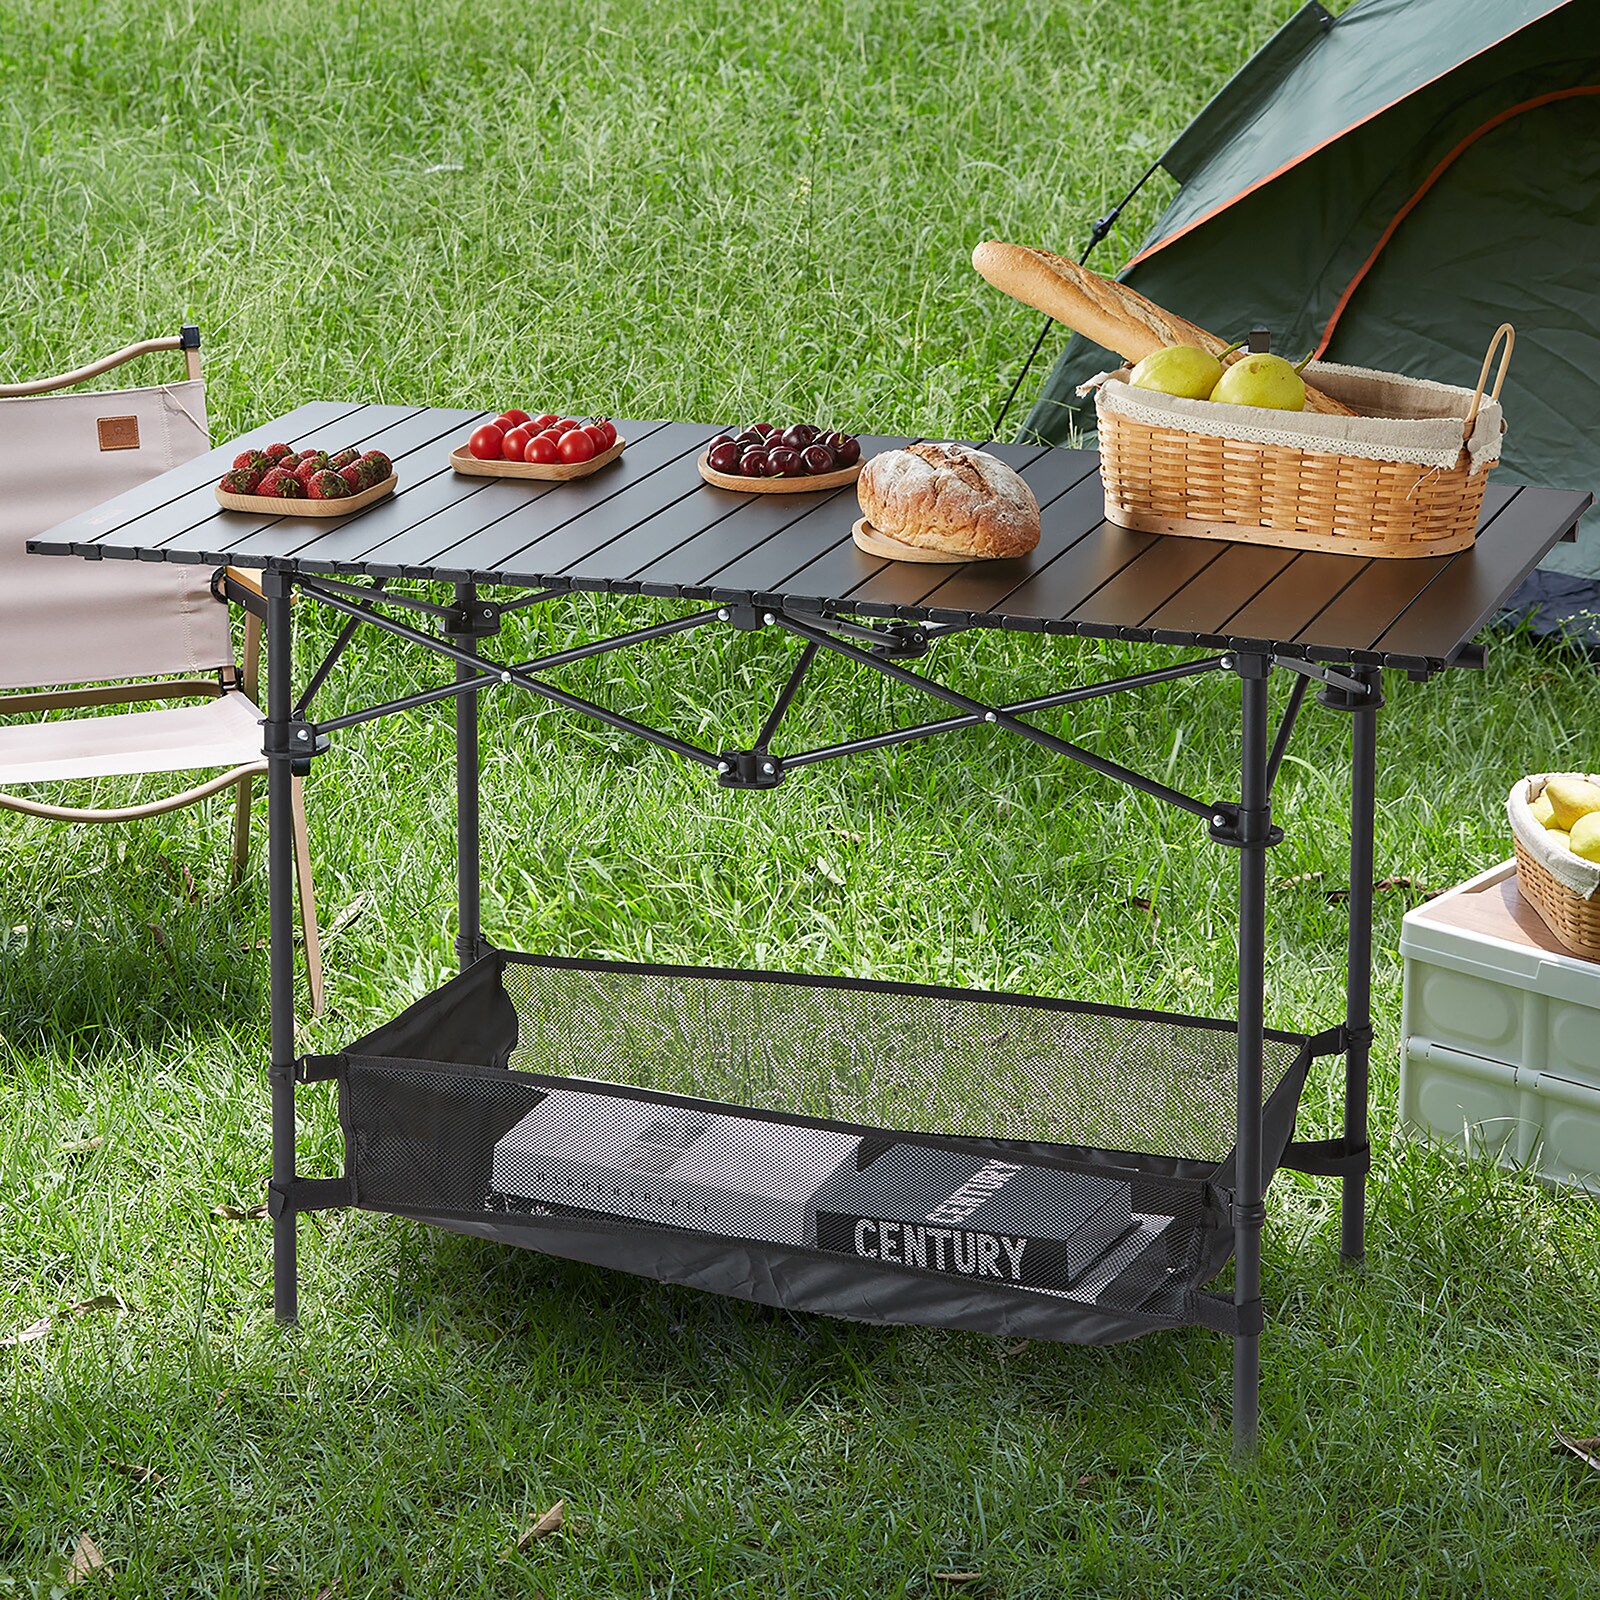 Picnic Setup for Two – Not Your Average Picnic